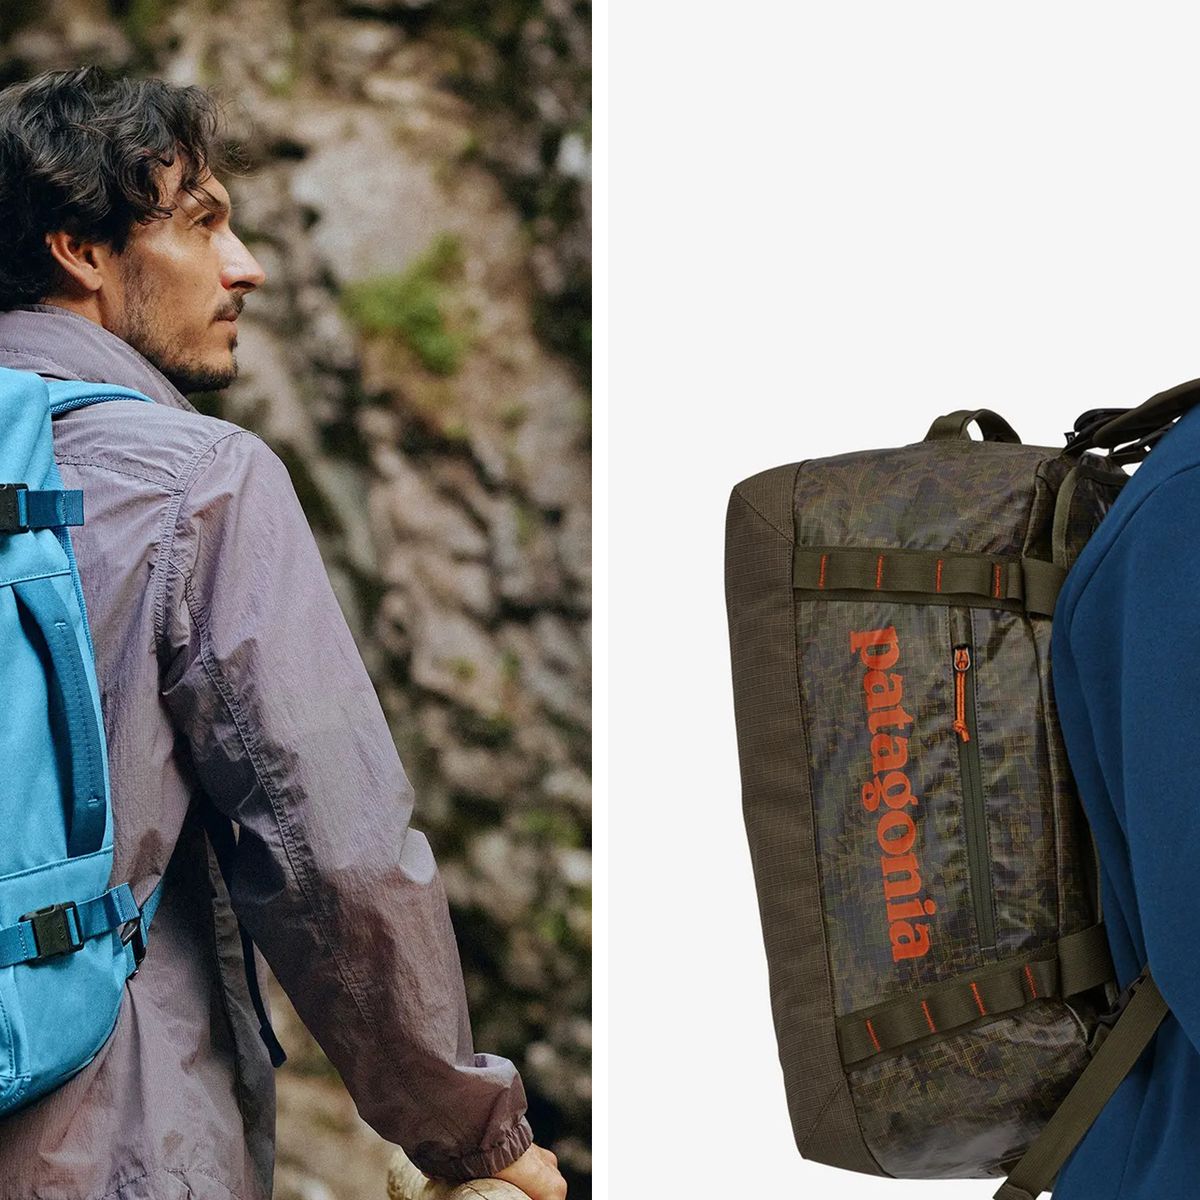 Samuel Distill Charles Keasing Patagonia Black Hole vs. Away F.A.R.: Which Travel Bag Is Better?